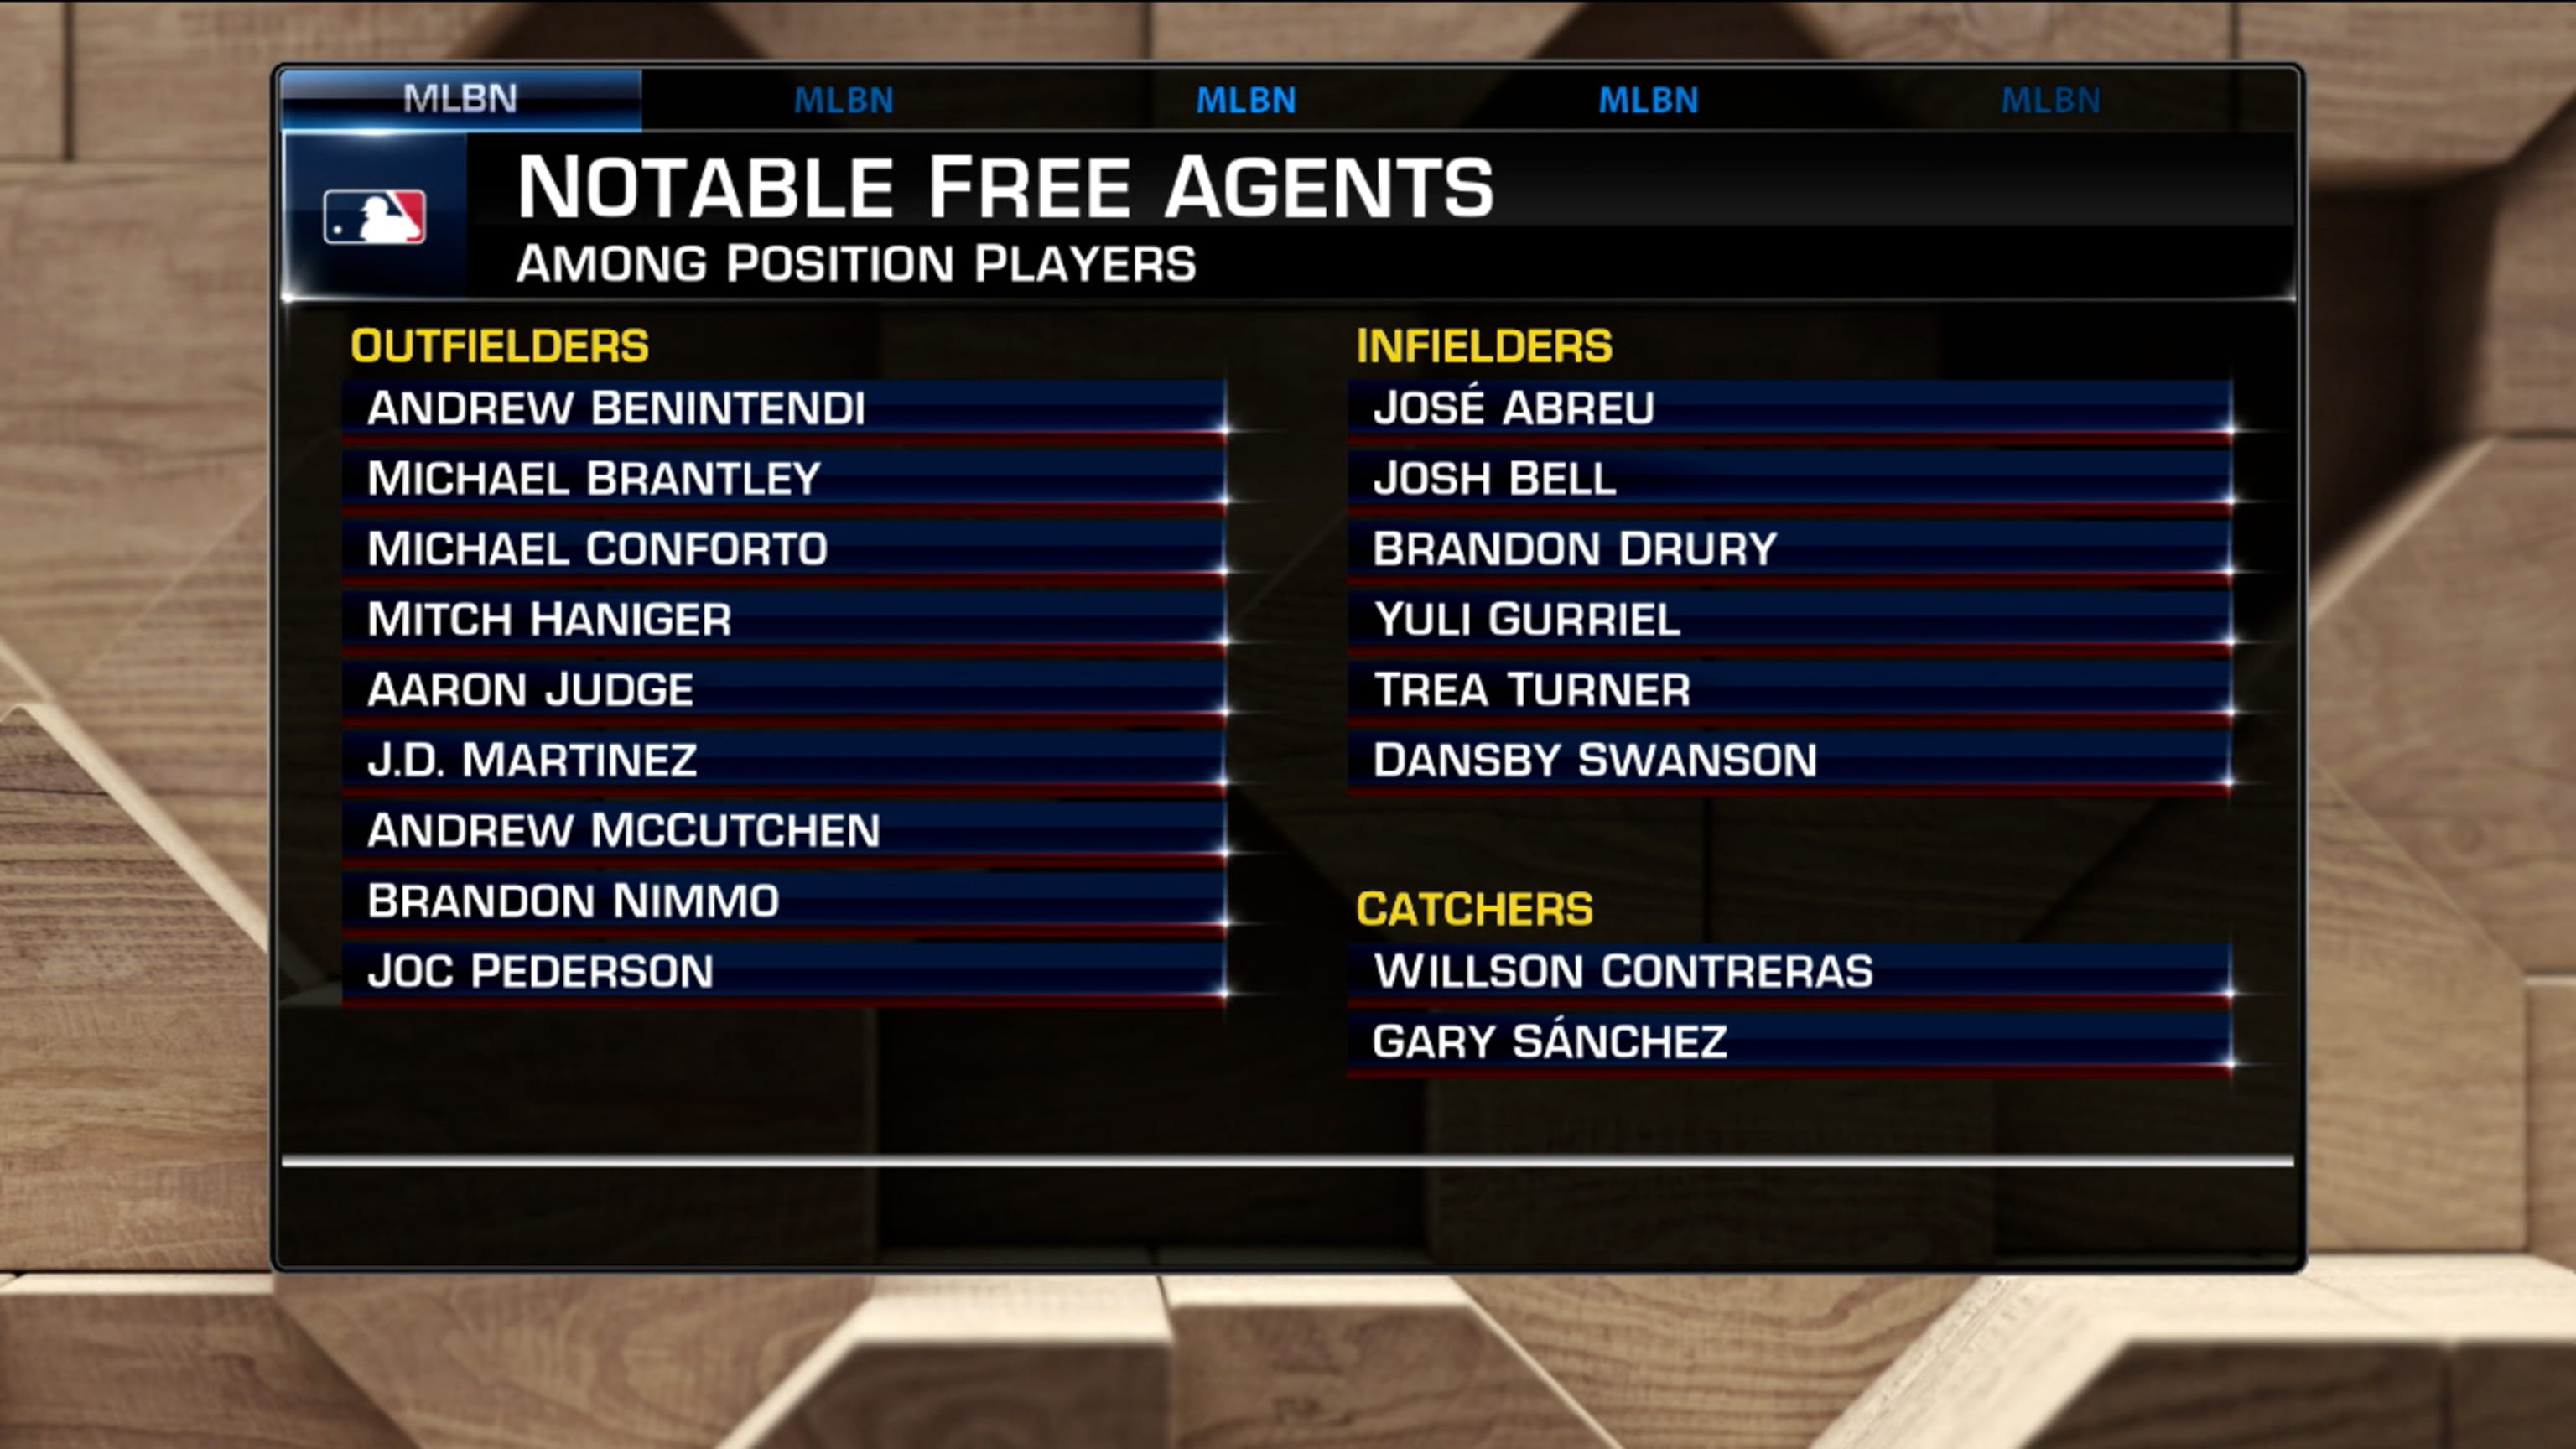 Reviewing upcoming free agents